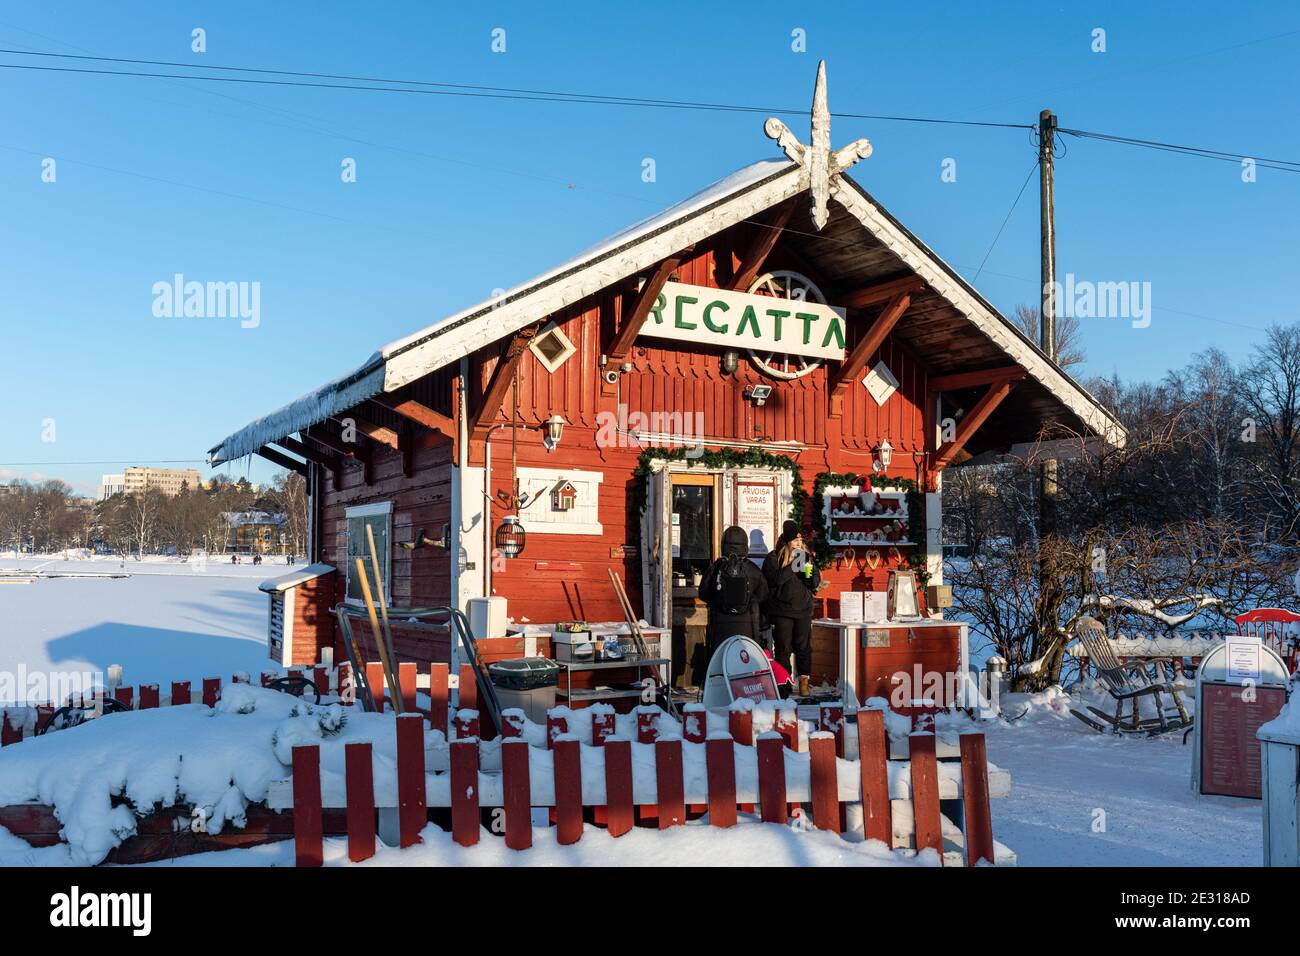 Café Regatta, a small over 120 years old red log cabin on the shores of Taivallahti with outdoor seating, during winter in Helsinki, Finland Stock Photo